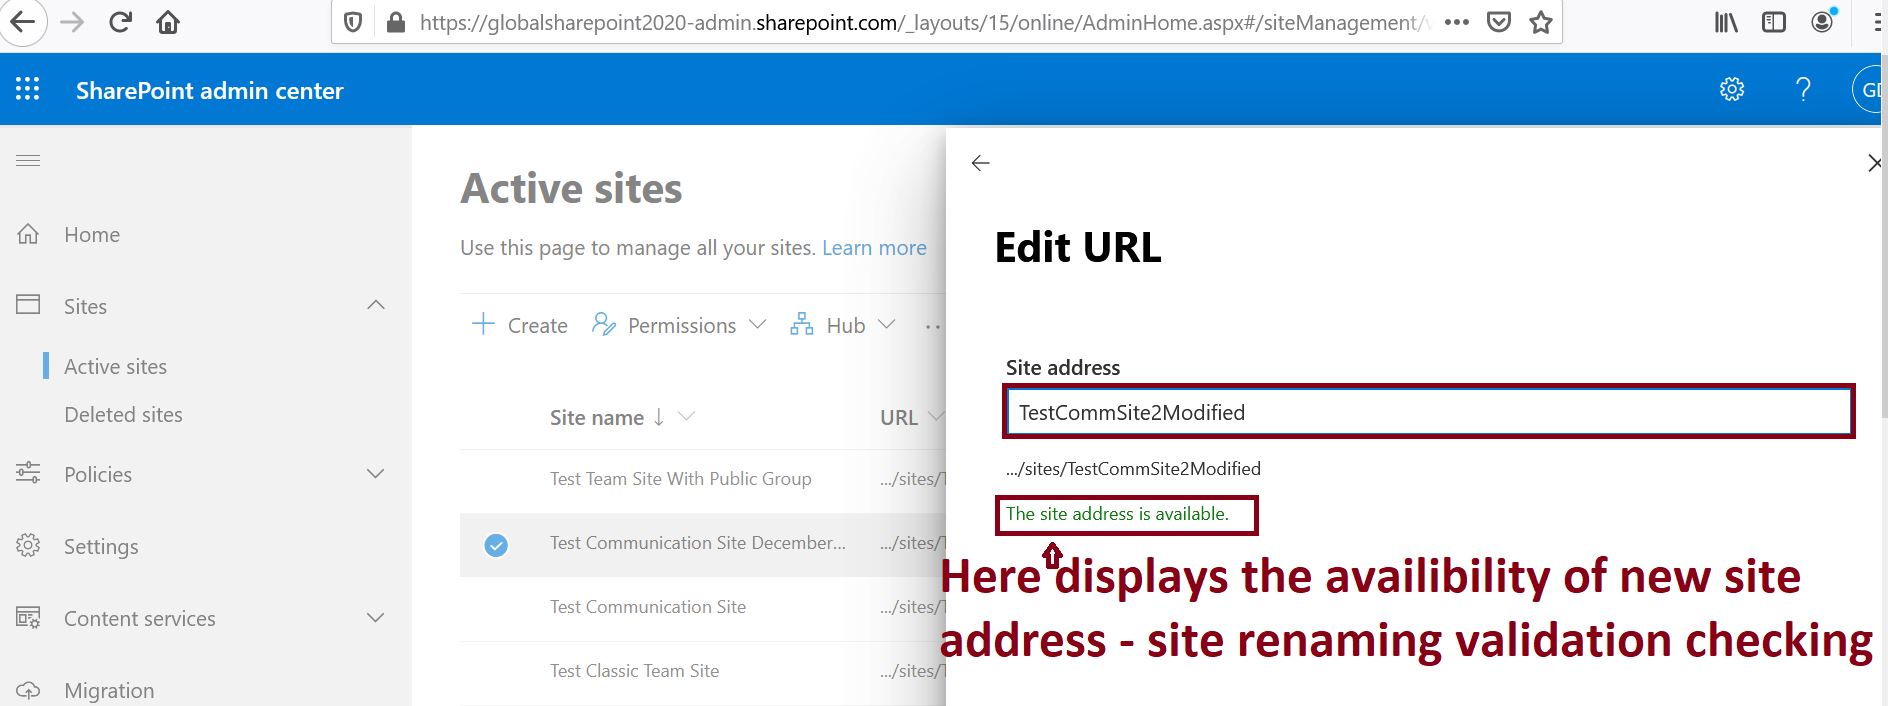 Change site URL in SharePoint online, site renaming validation while editing the site URL in SharePoint Online